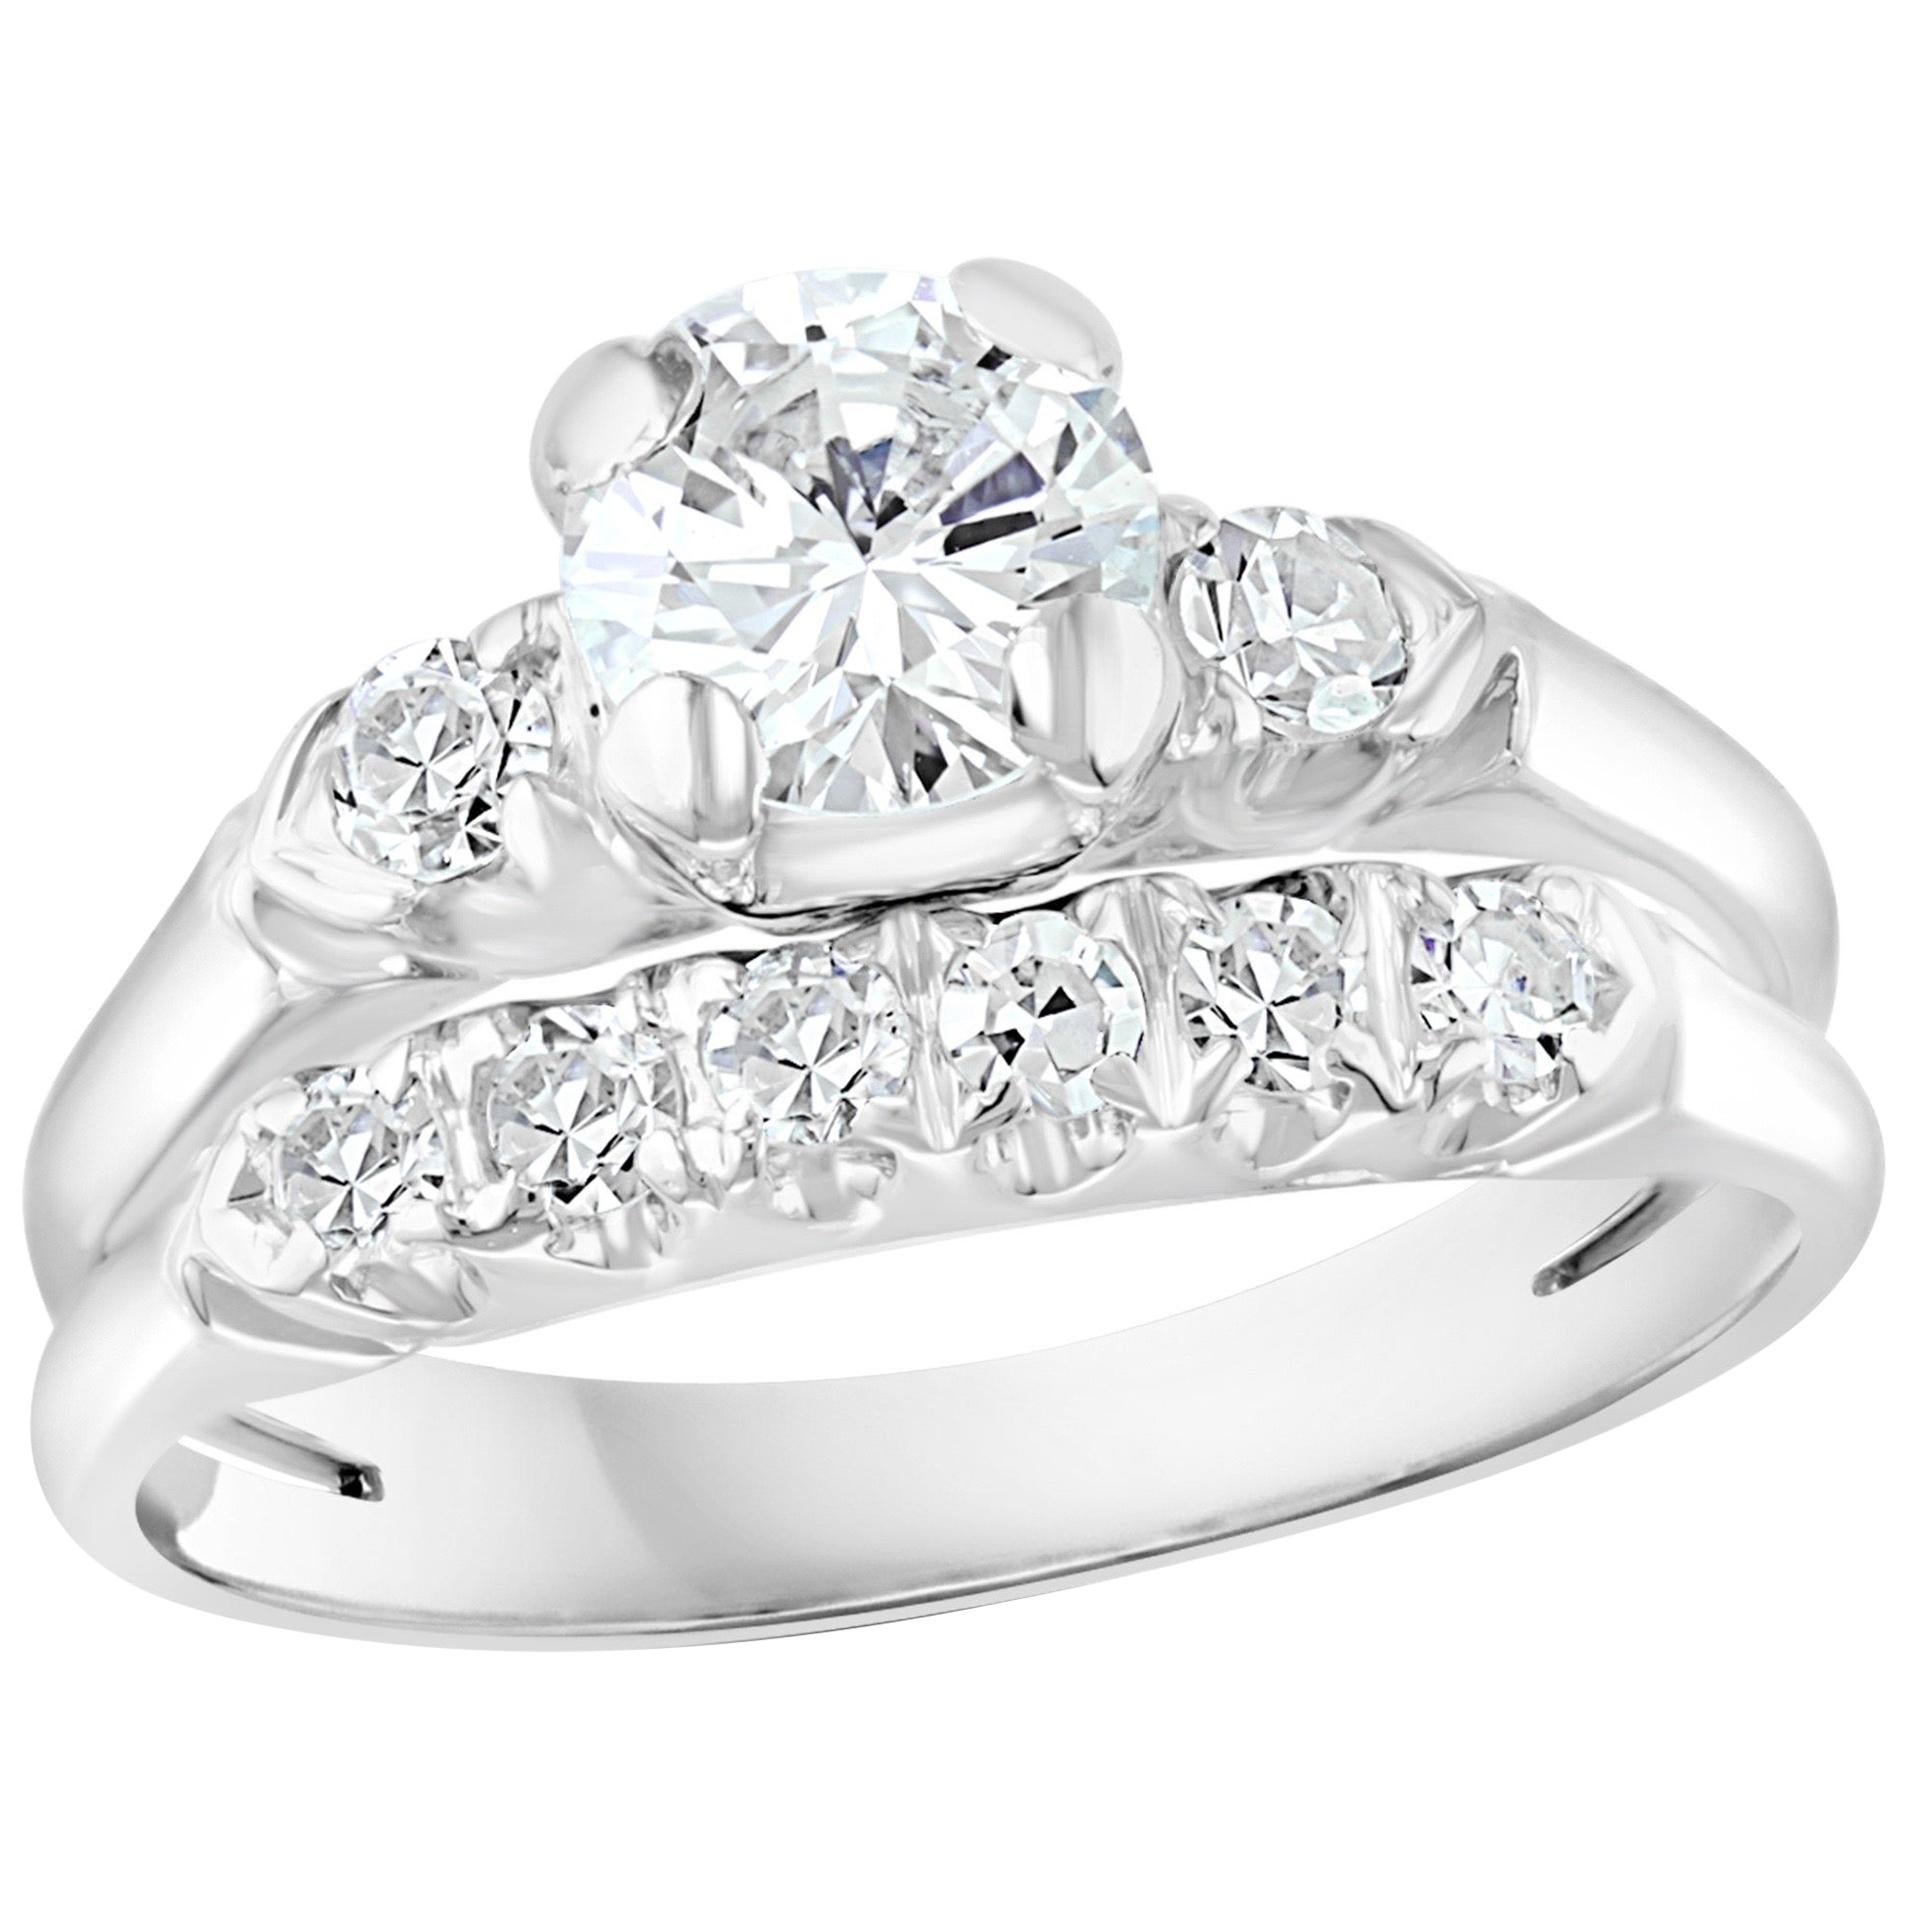 Approximately 0.6 Ct Solitaire Round Center Diamond 14 Kt White Gold Ring & Band